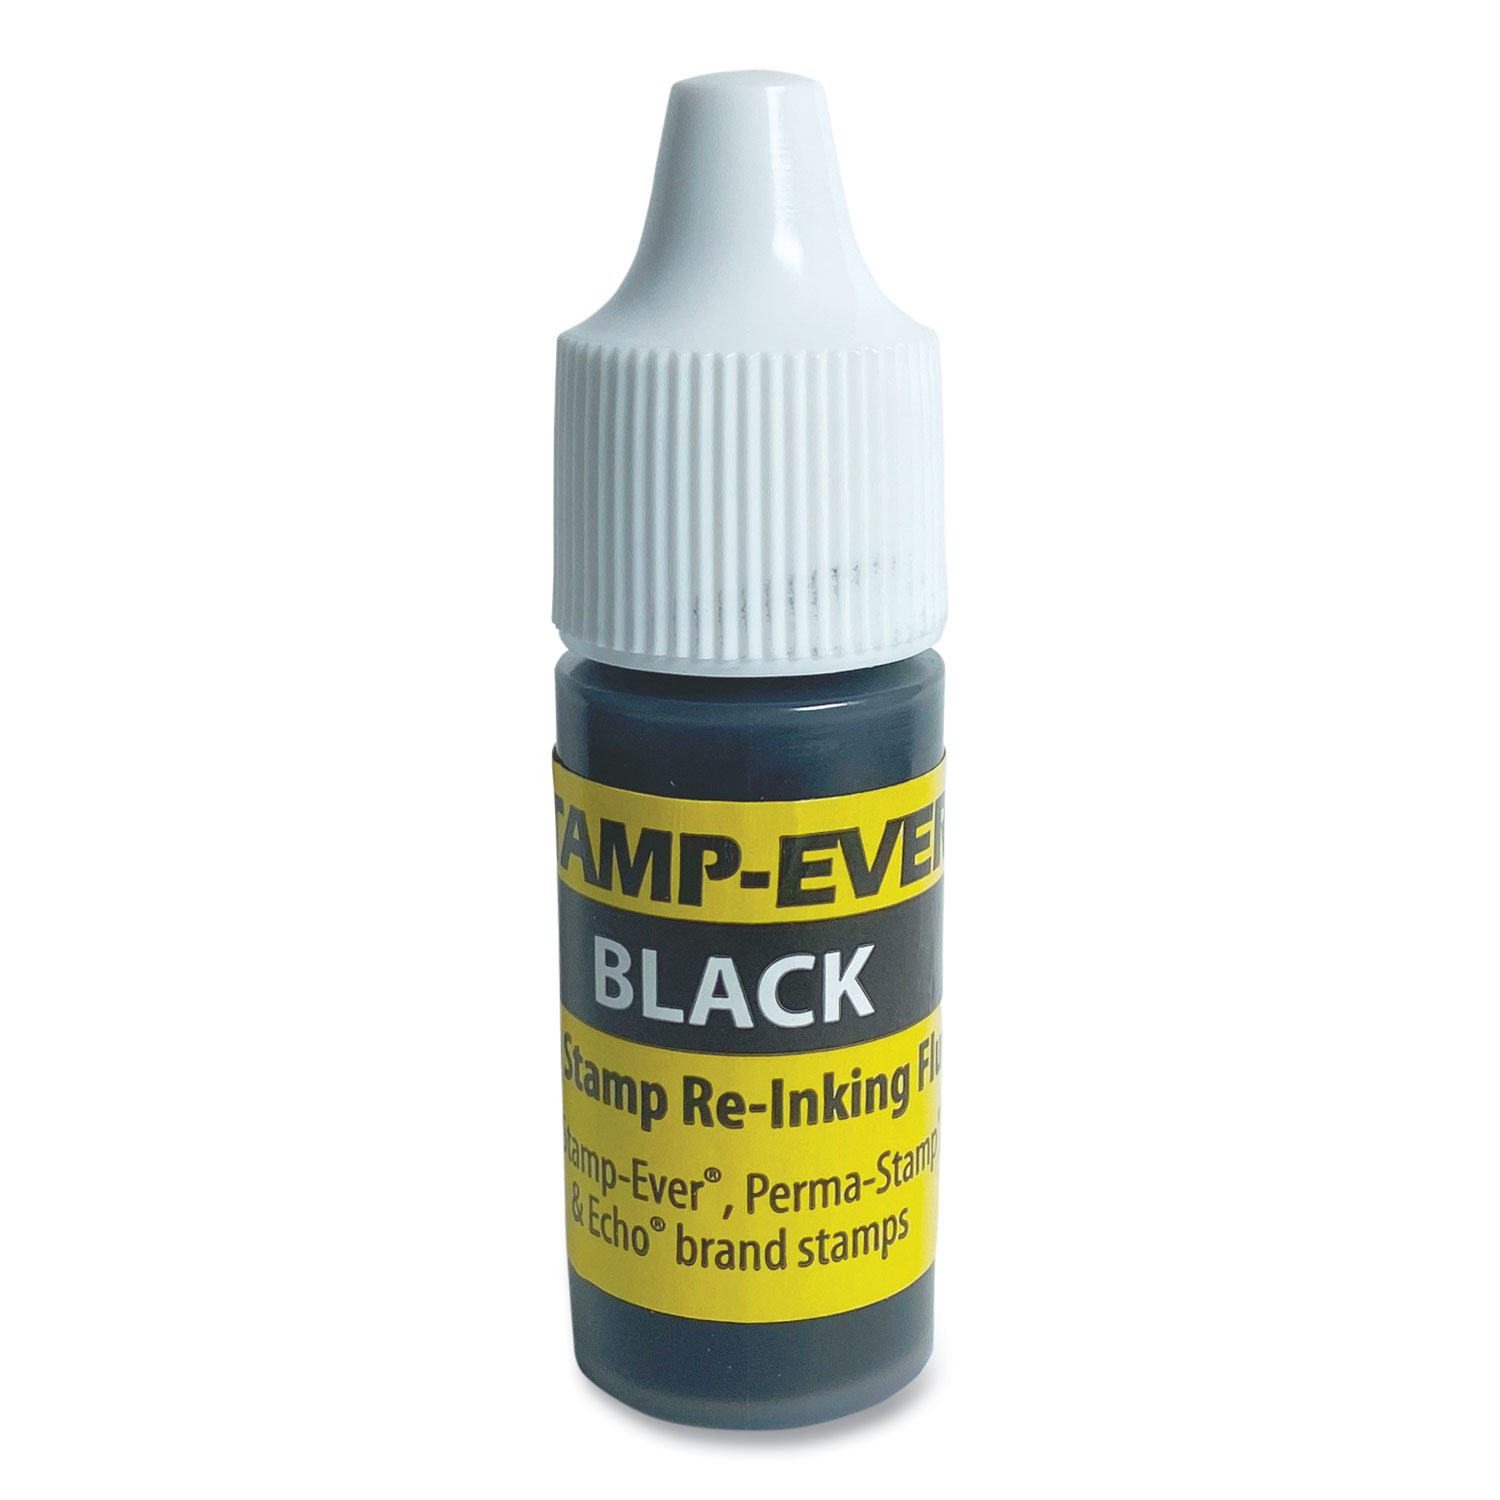 Refill Ink for Clik! and Universal Stamps, 7 mL Bottle, Black - Zerbee